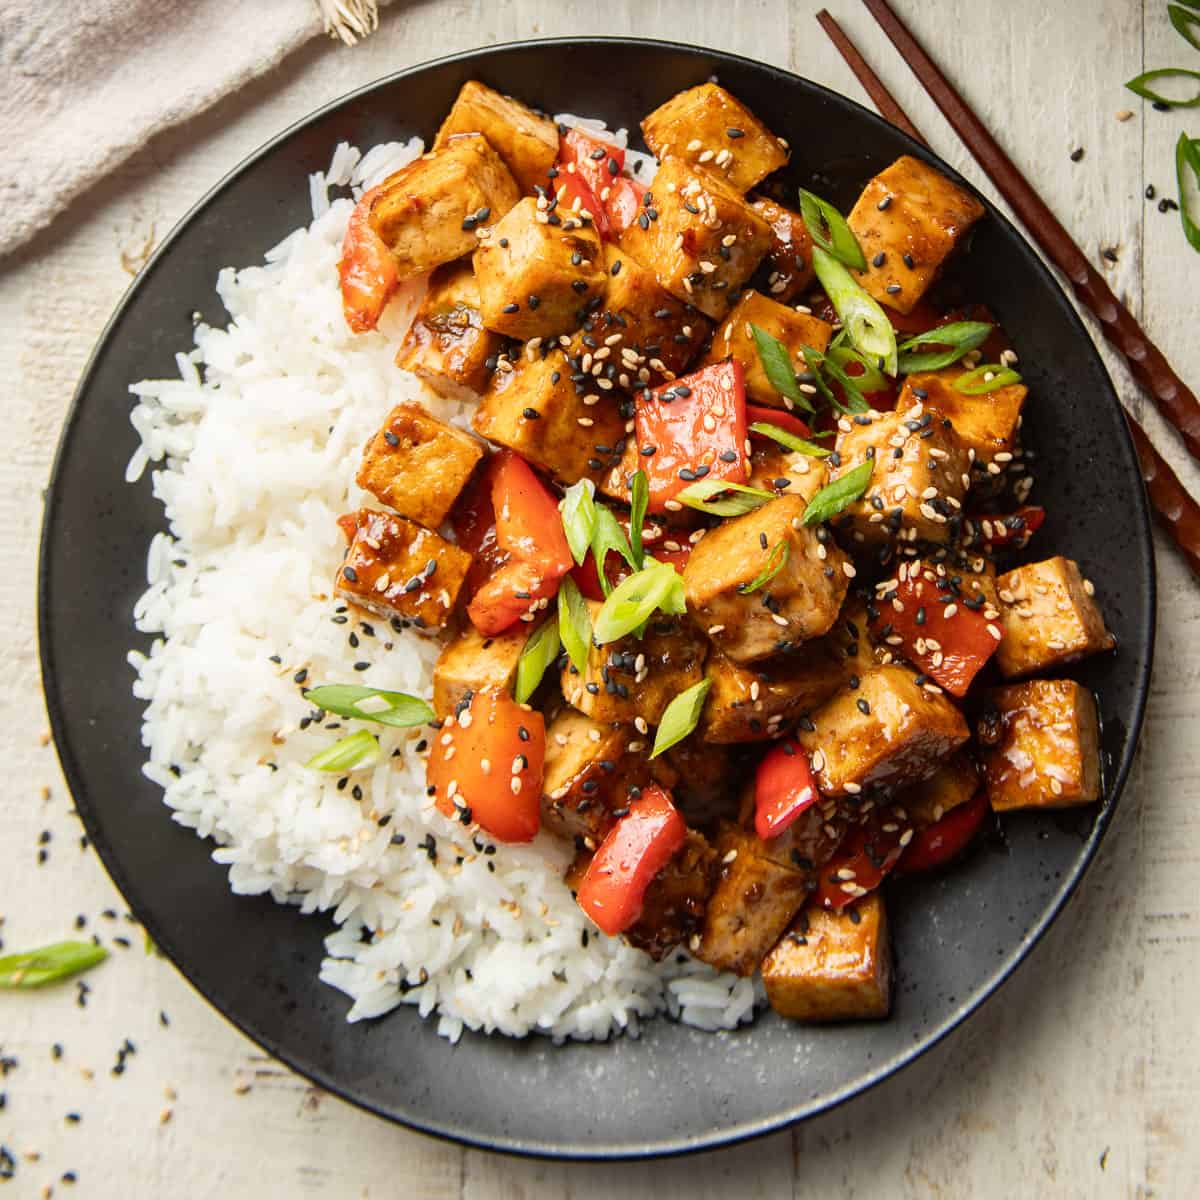 Plate of Szechuan Tofu and rice with chopsticks on the side.